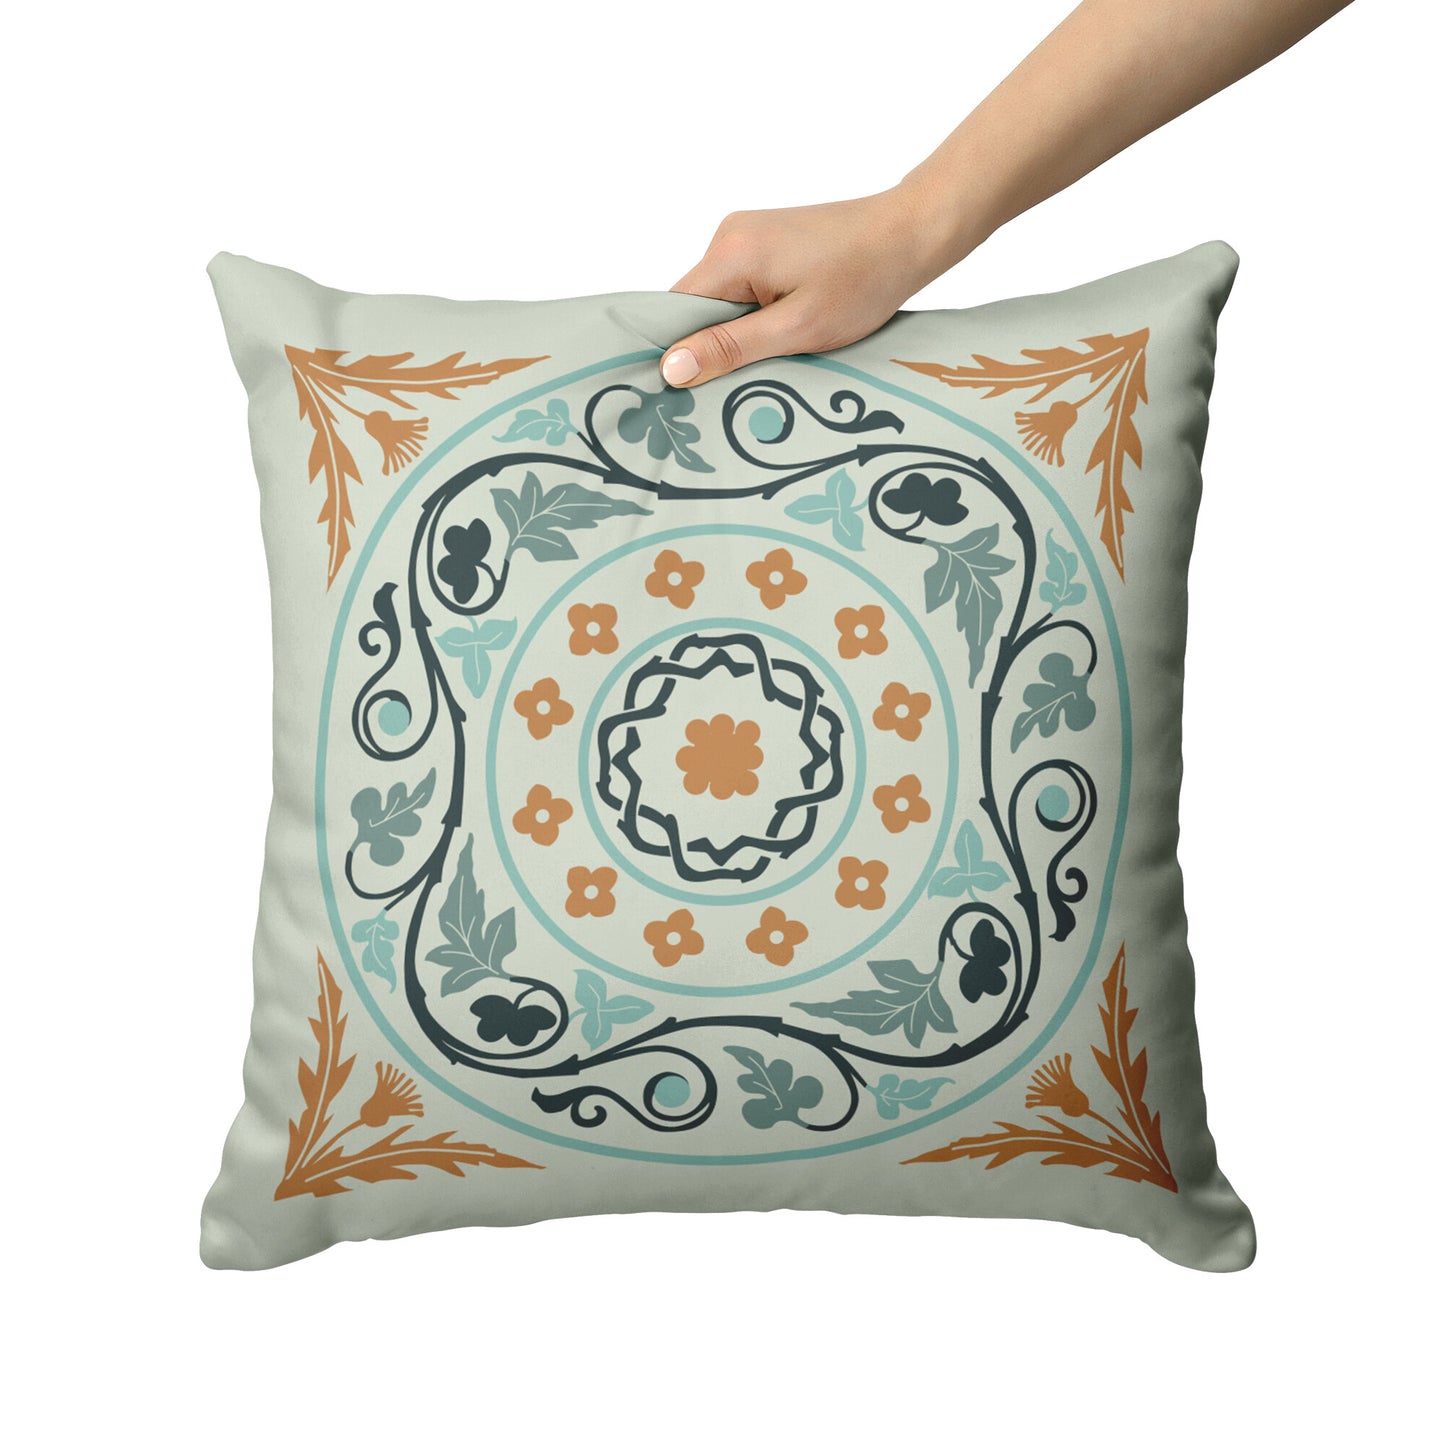 Green and Gold Medieval Inspired Pillows